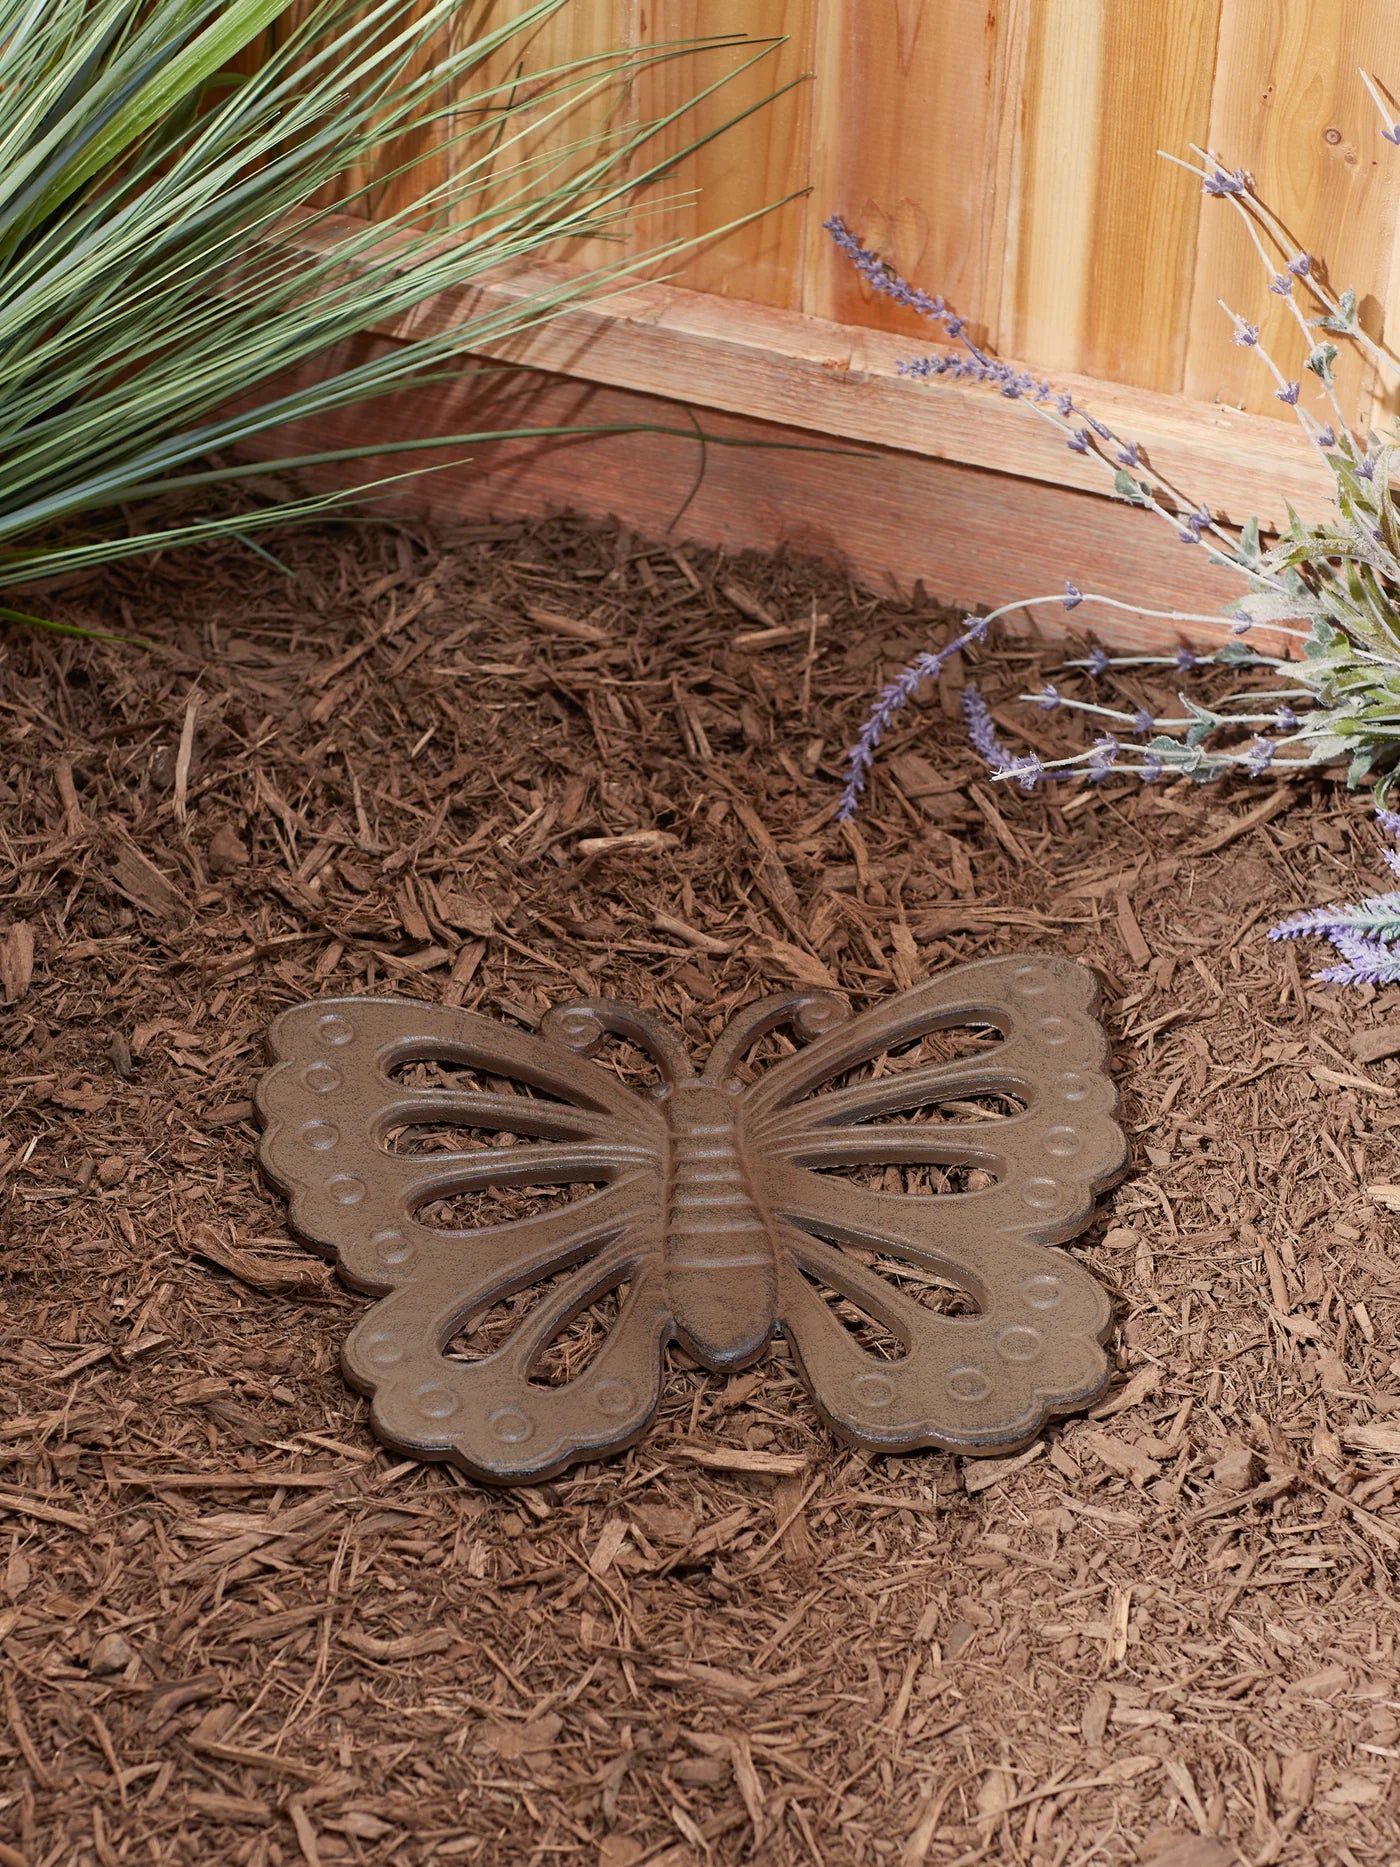 Butterfly Stepping Stone